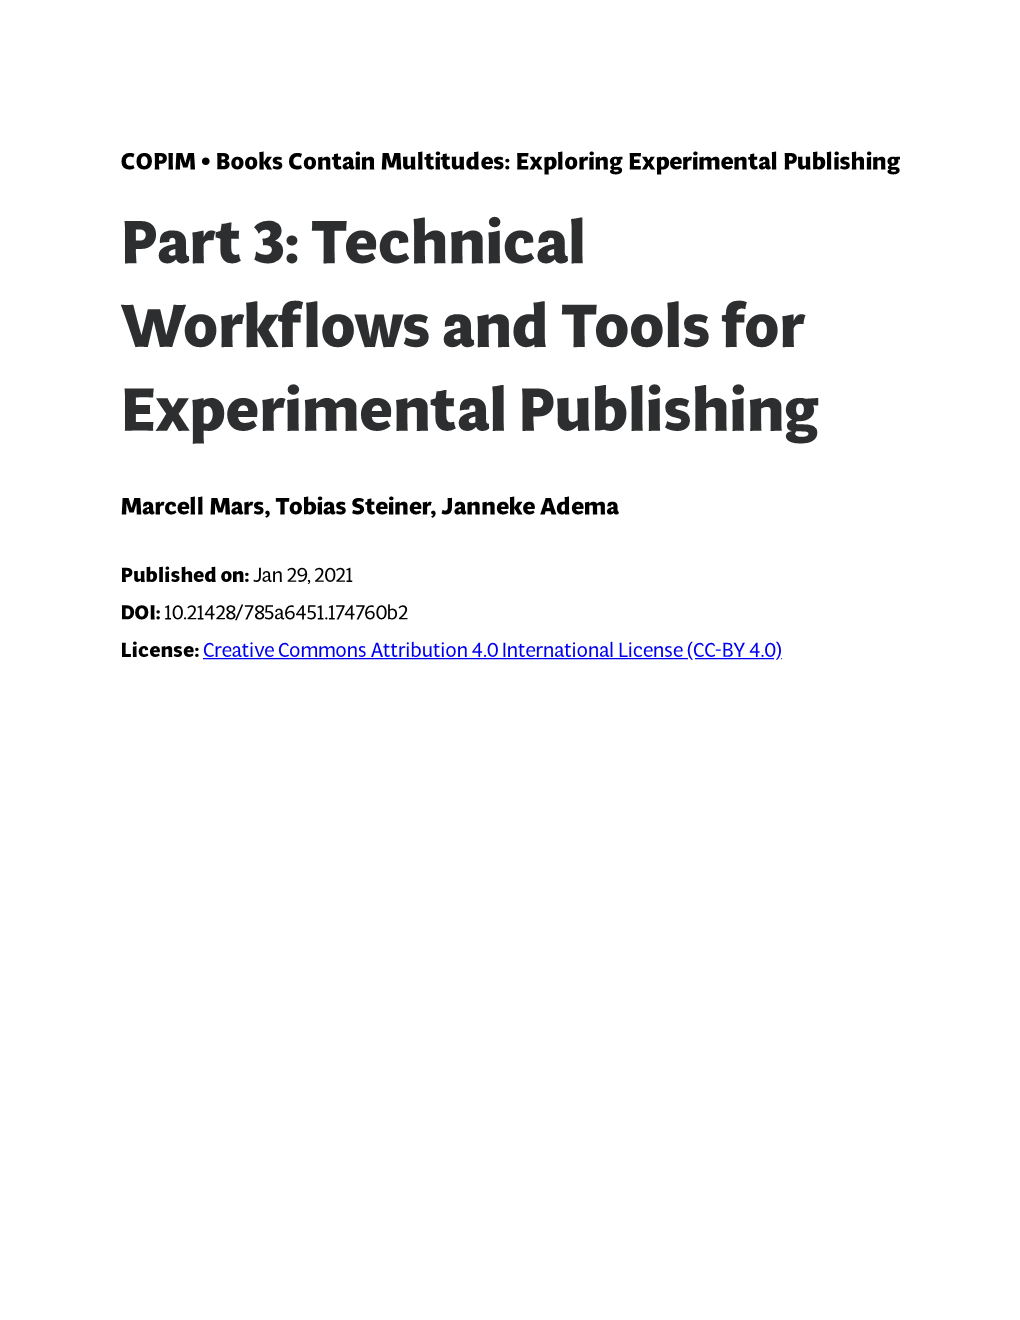 Technical Workflows and Tools for Experimental Publishing